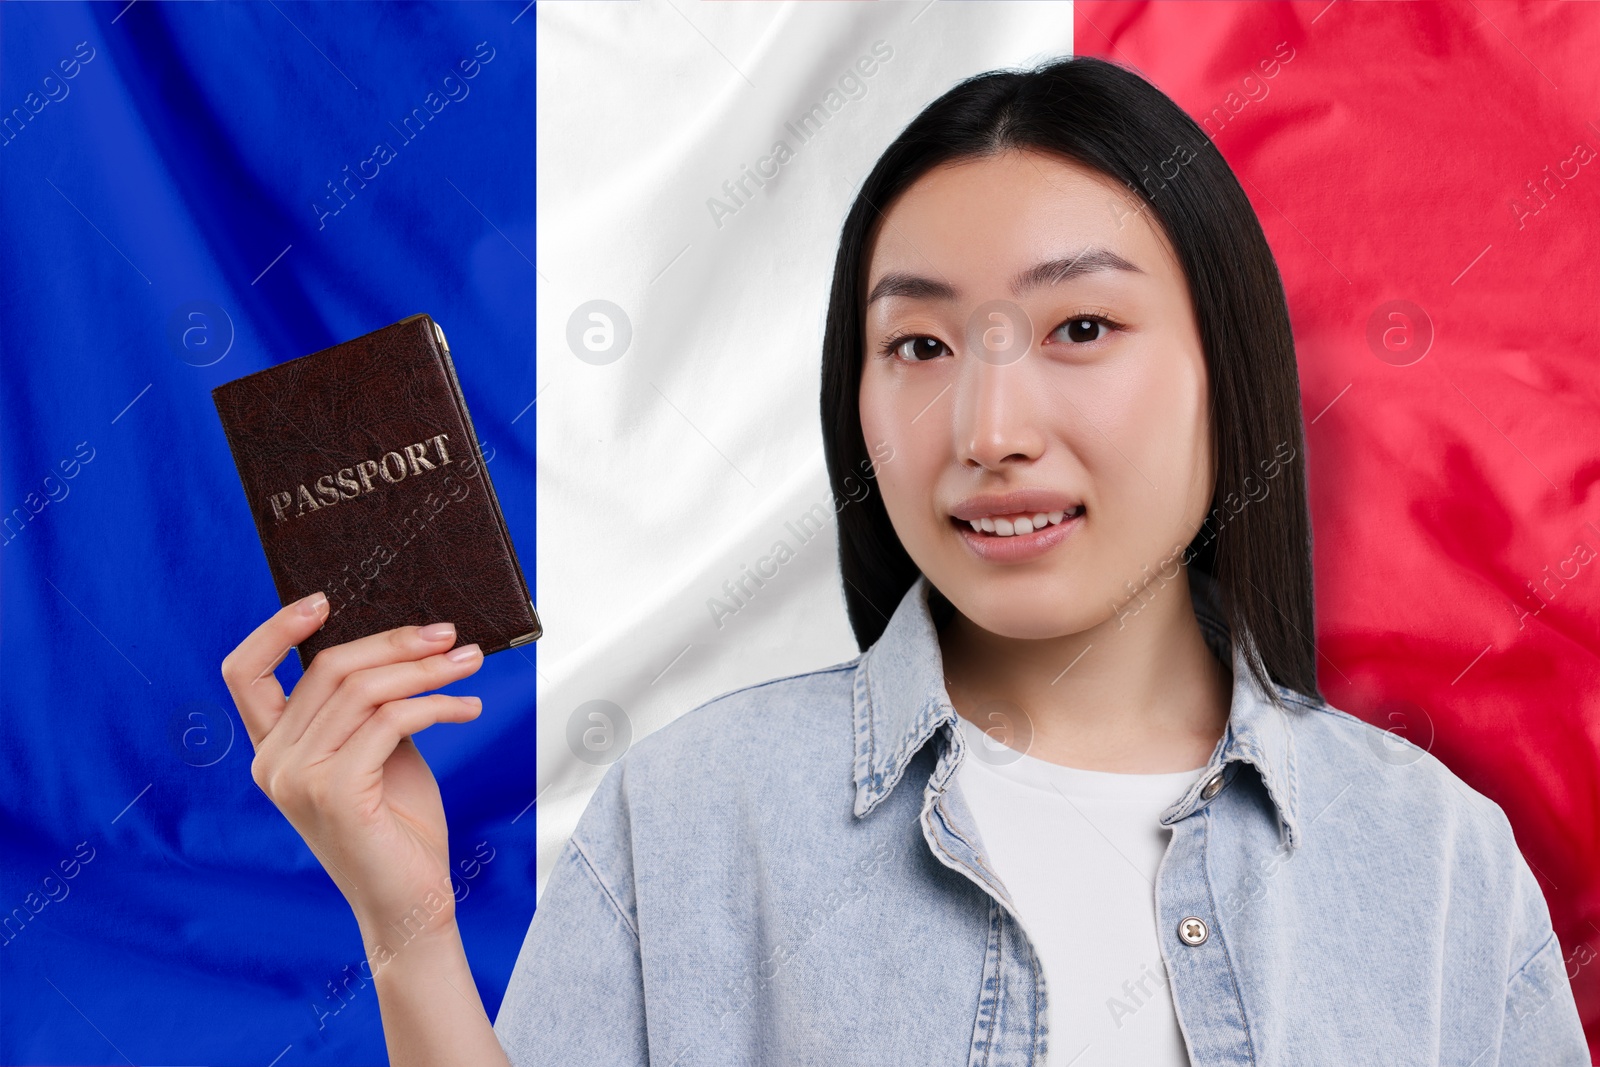 Image of Immigration. Woman with passport against national flag of France